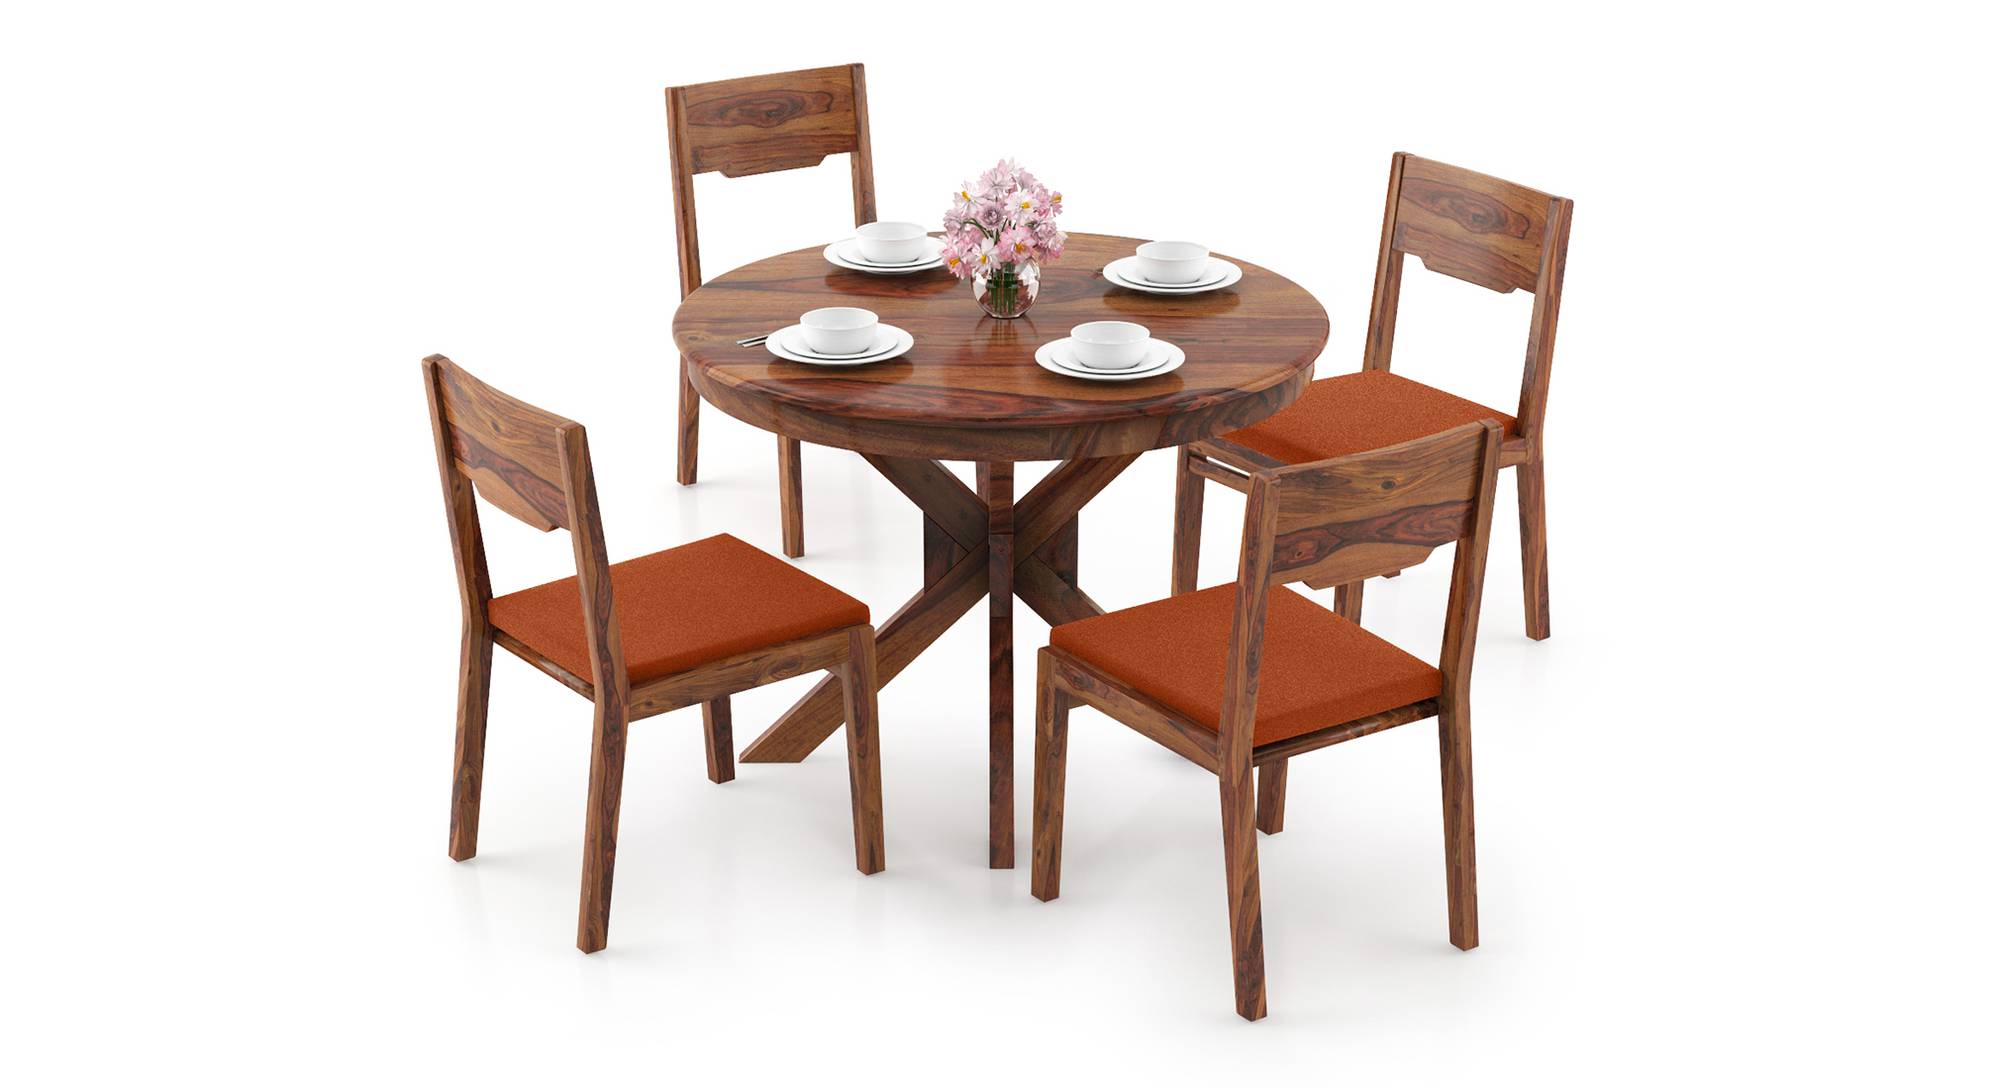 Liana Kerry 4 Seater Round Dining Table Set Urban Ladder